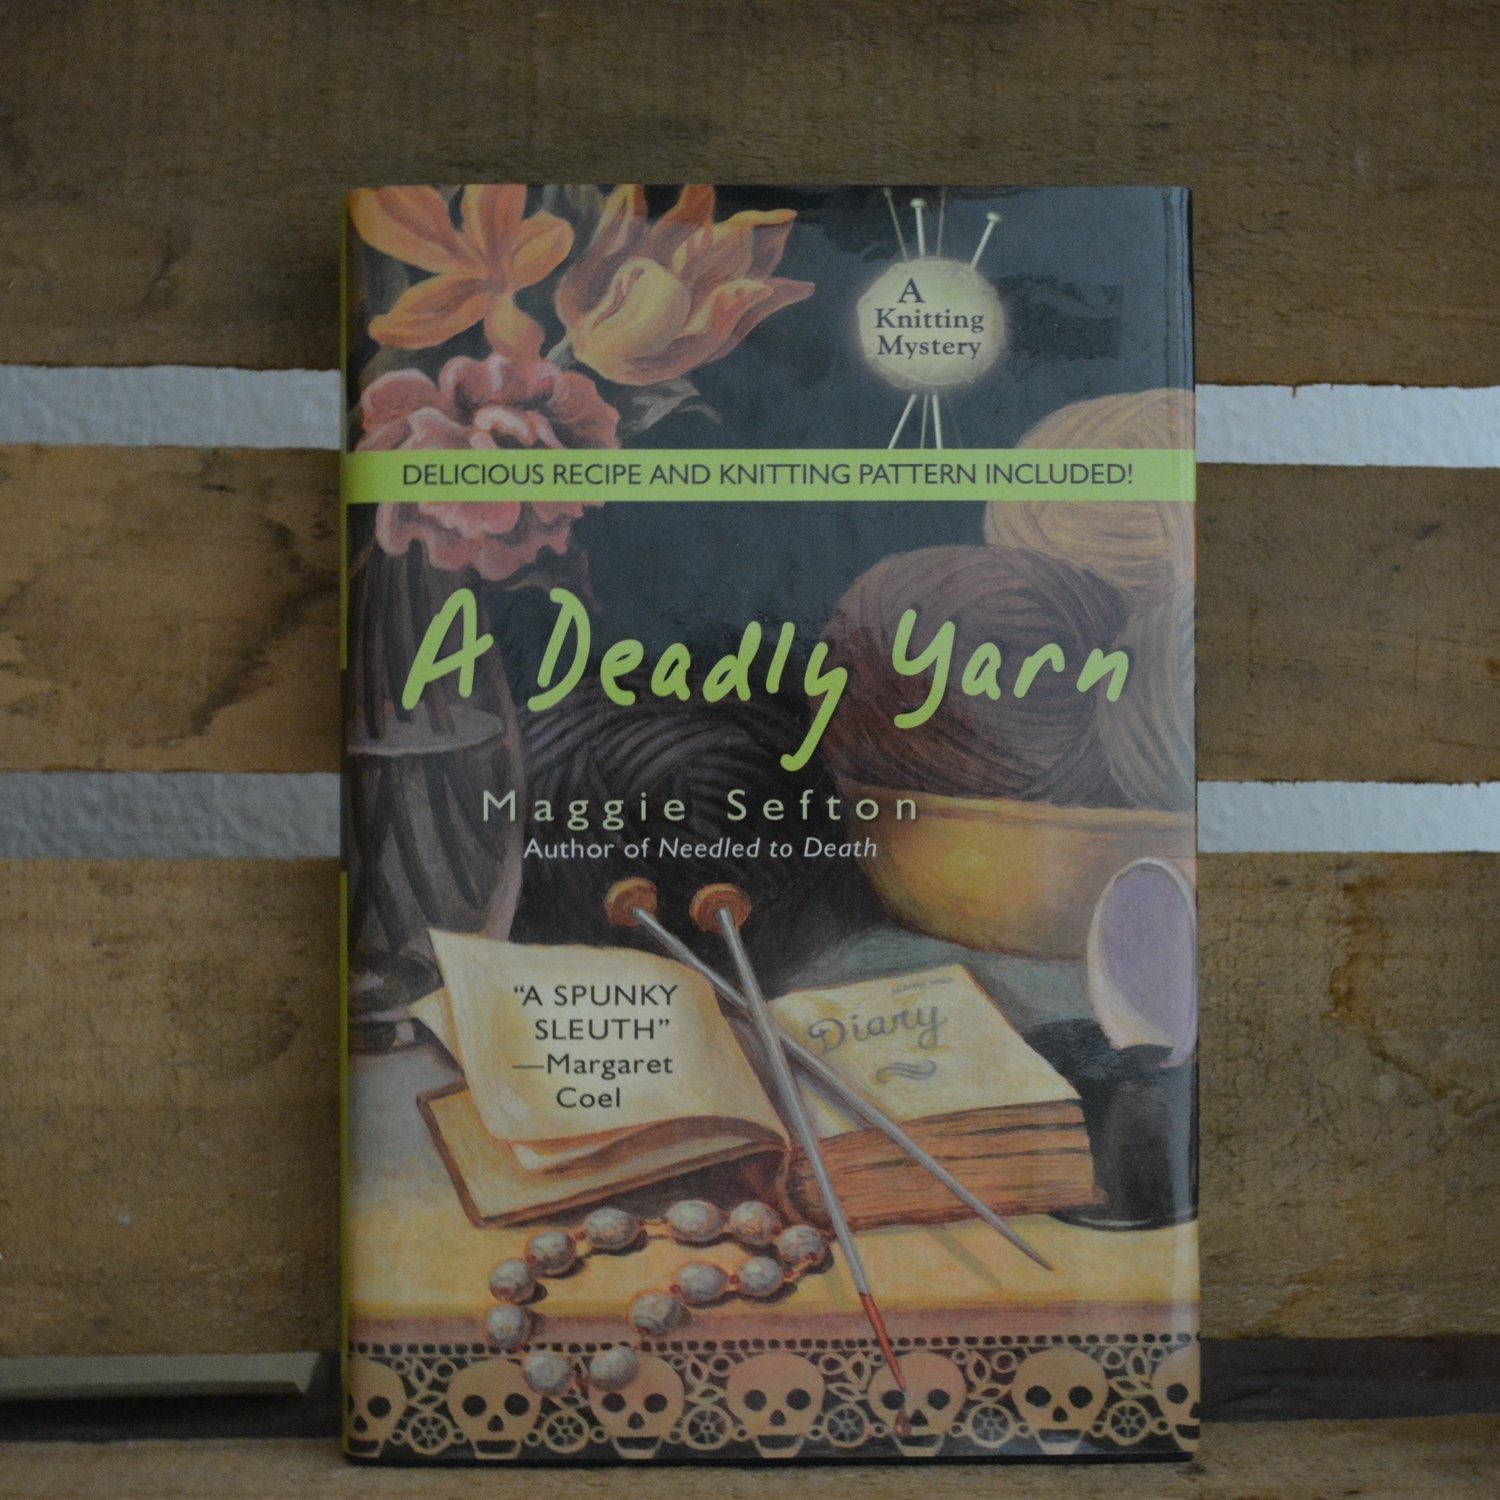 A Deadly Yarn by Maggie Sefton